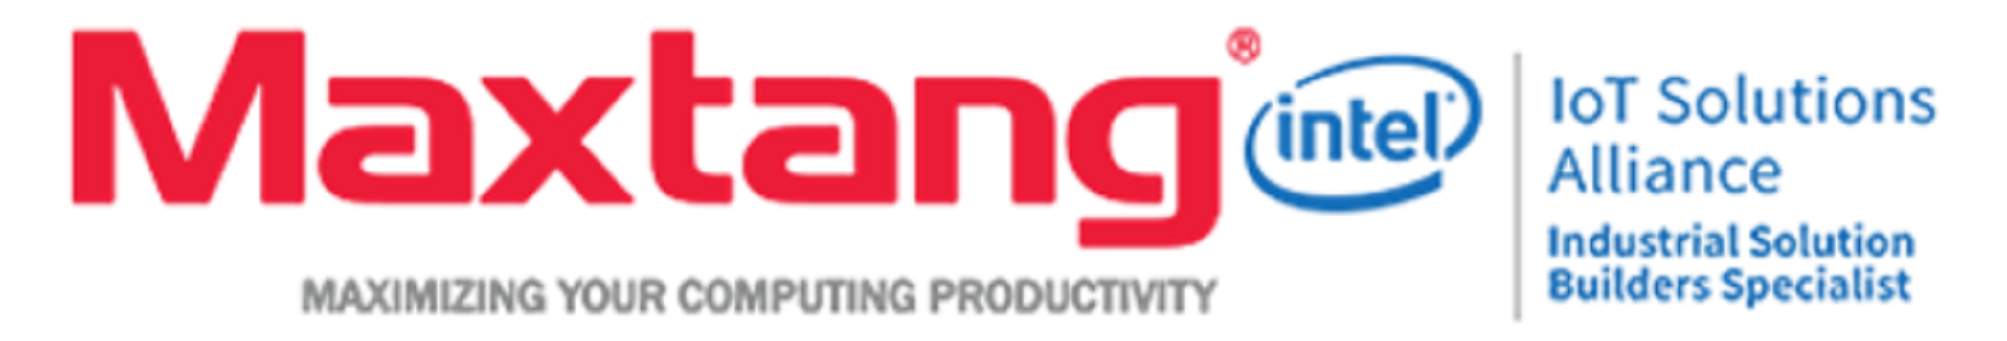 Maxtang Technology Limited